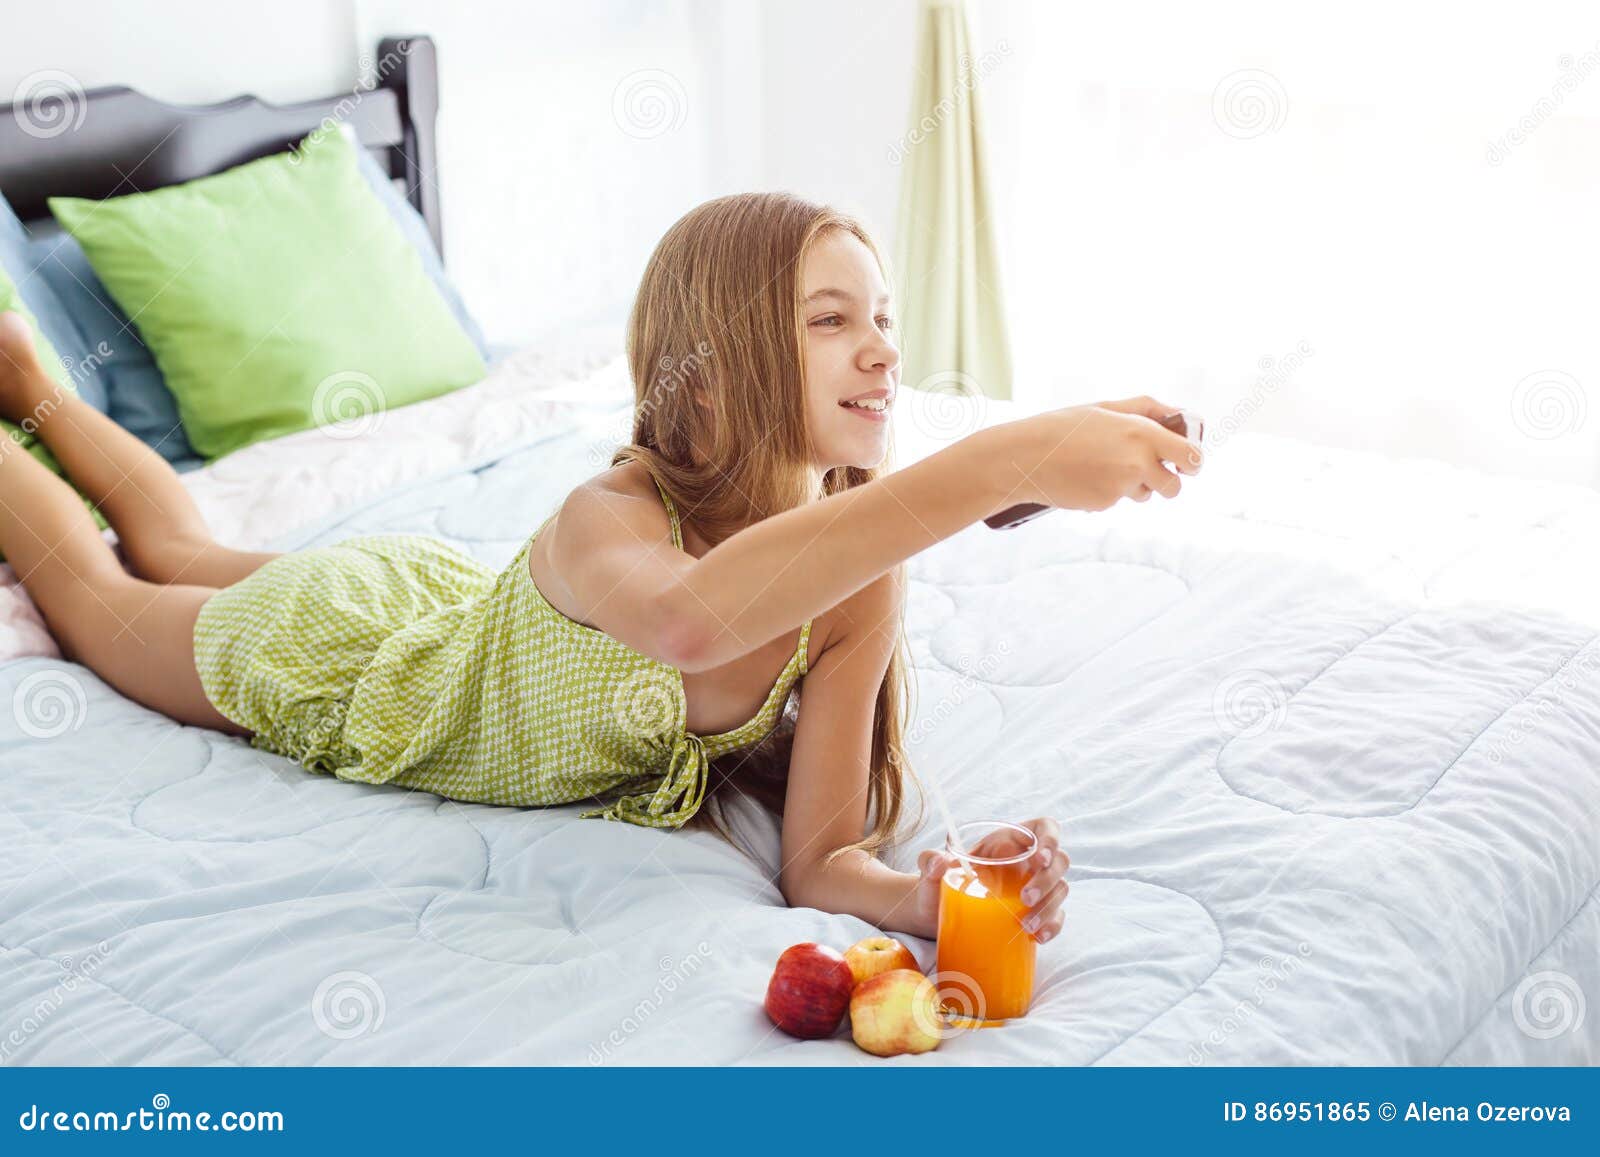 Girl Drinking Juice And Watching Tv In Bedroom Stock Image ...